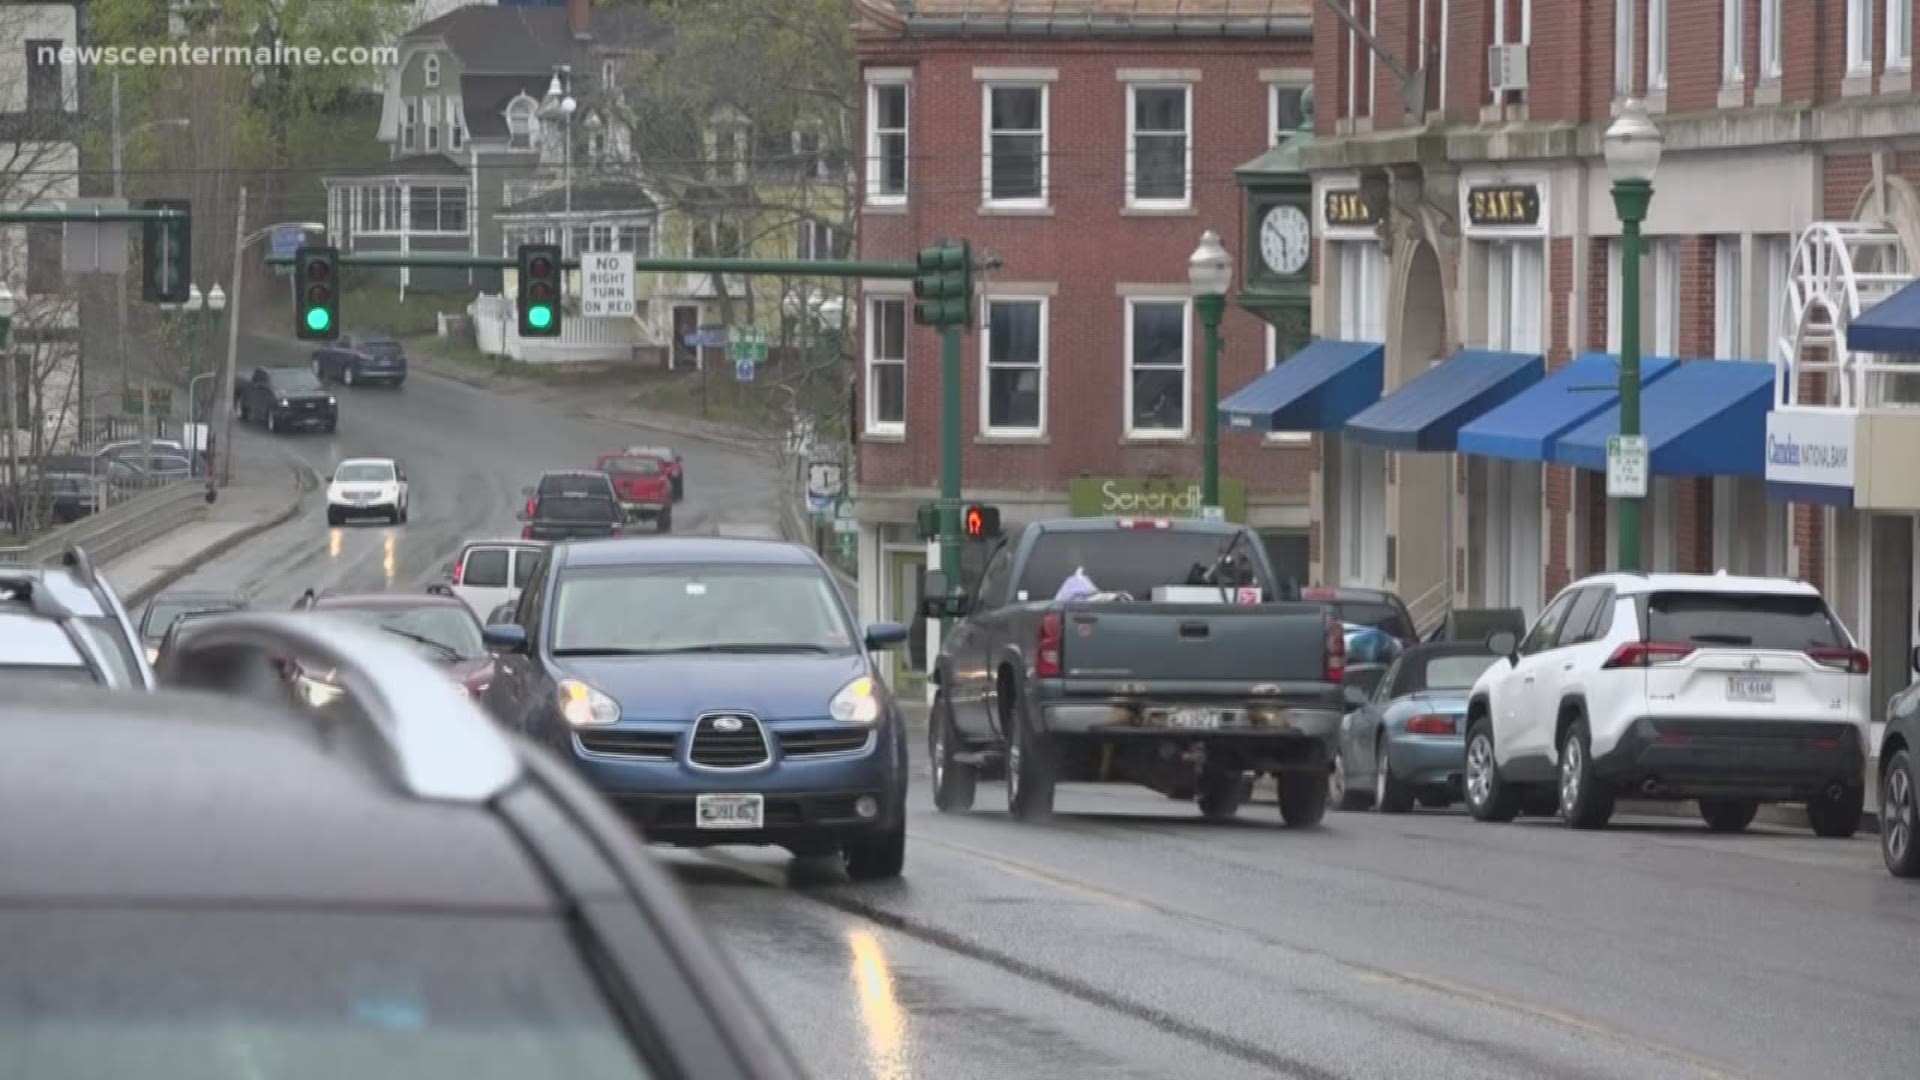 The Ellsworth city council voted this week to install bird's eye view cameras above all 12 traffic lights in the city.